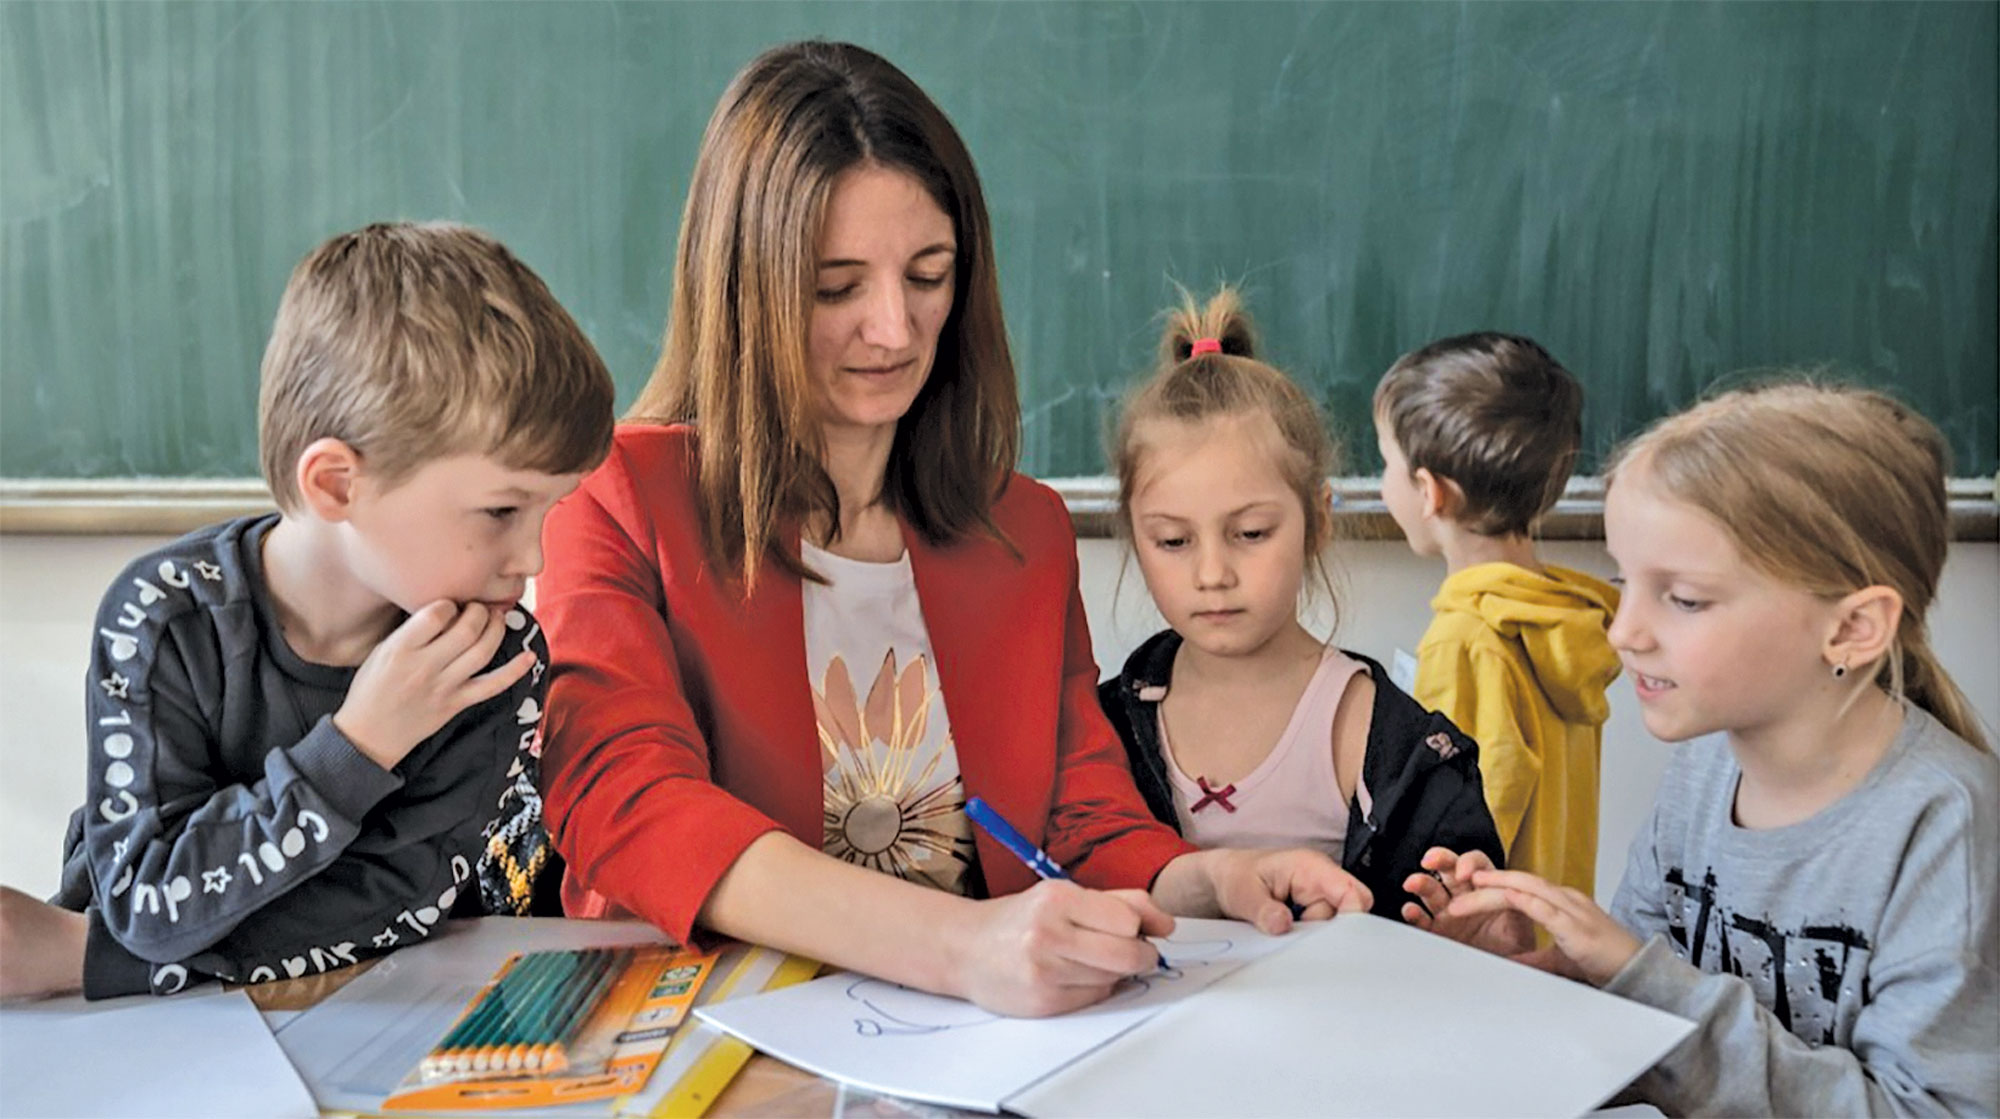 A woman wearing a red blazer sits at a table with four young children teaching a lesson on paper